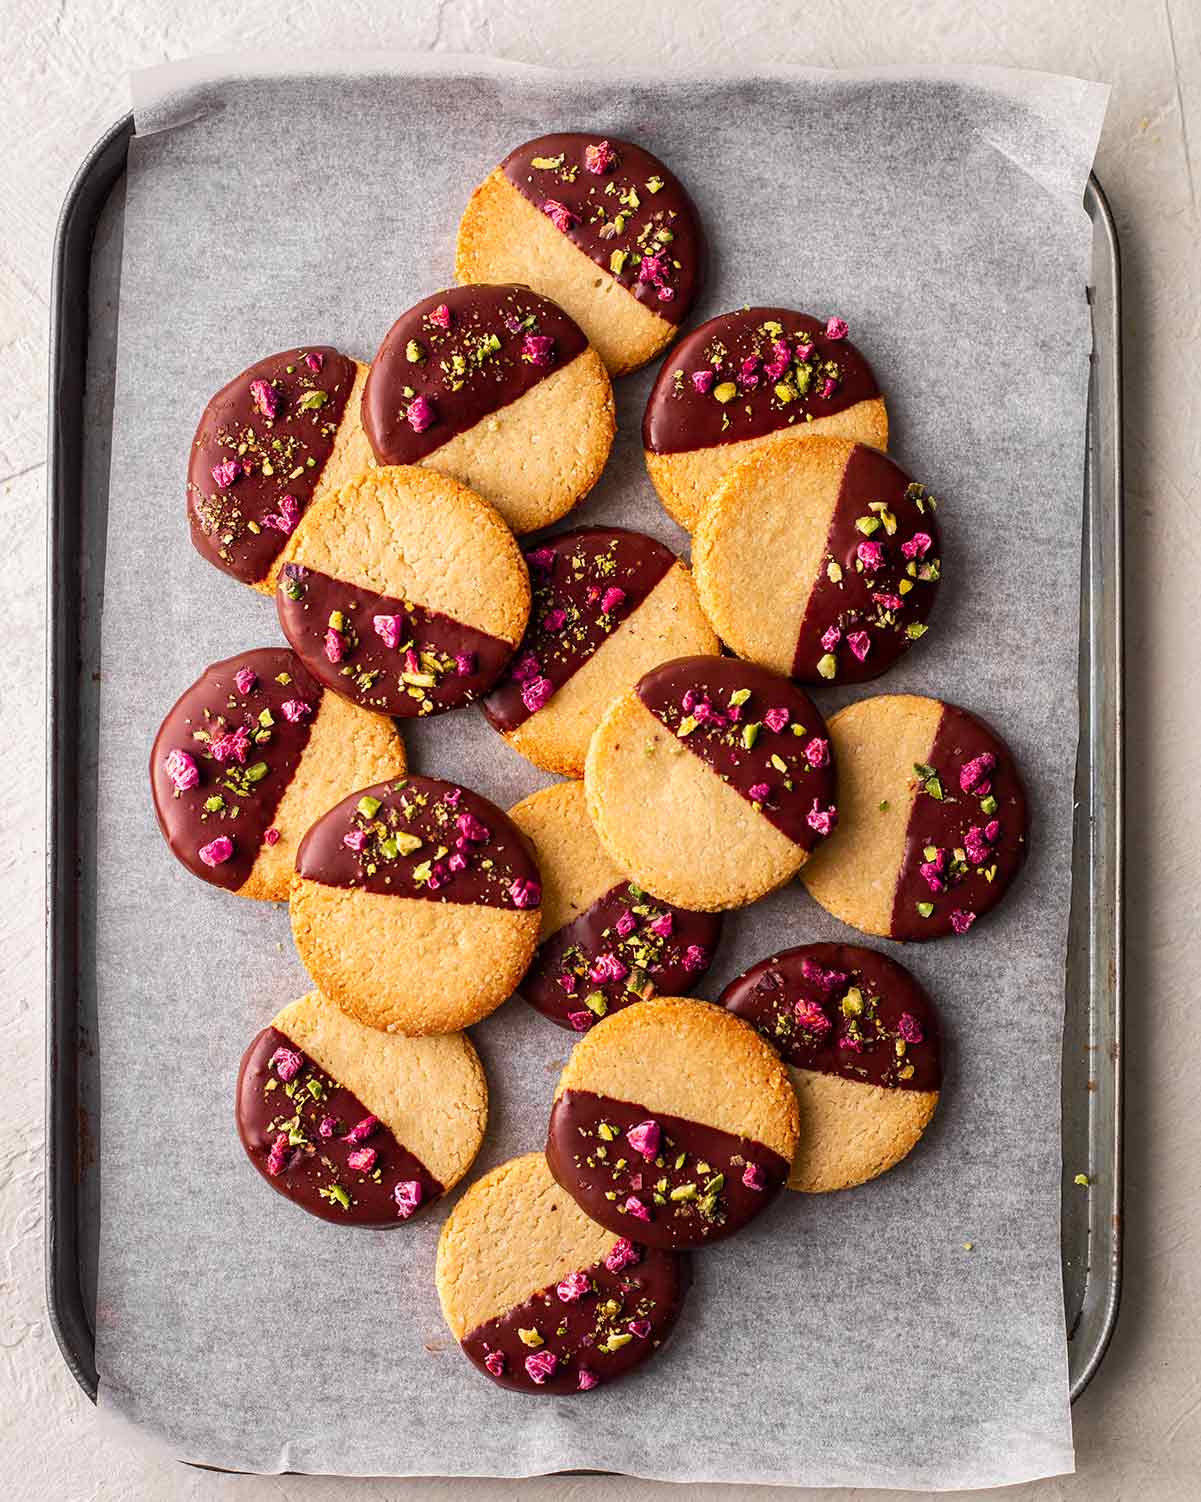 Shortbread cookies half dipped in chocolate with pistachios and freeze dried raspberries sprinkled on the chocolate. Cookies are on a lined baking tray.